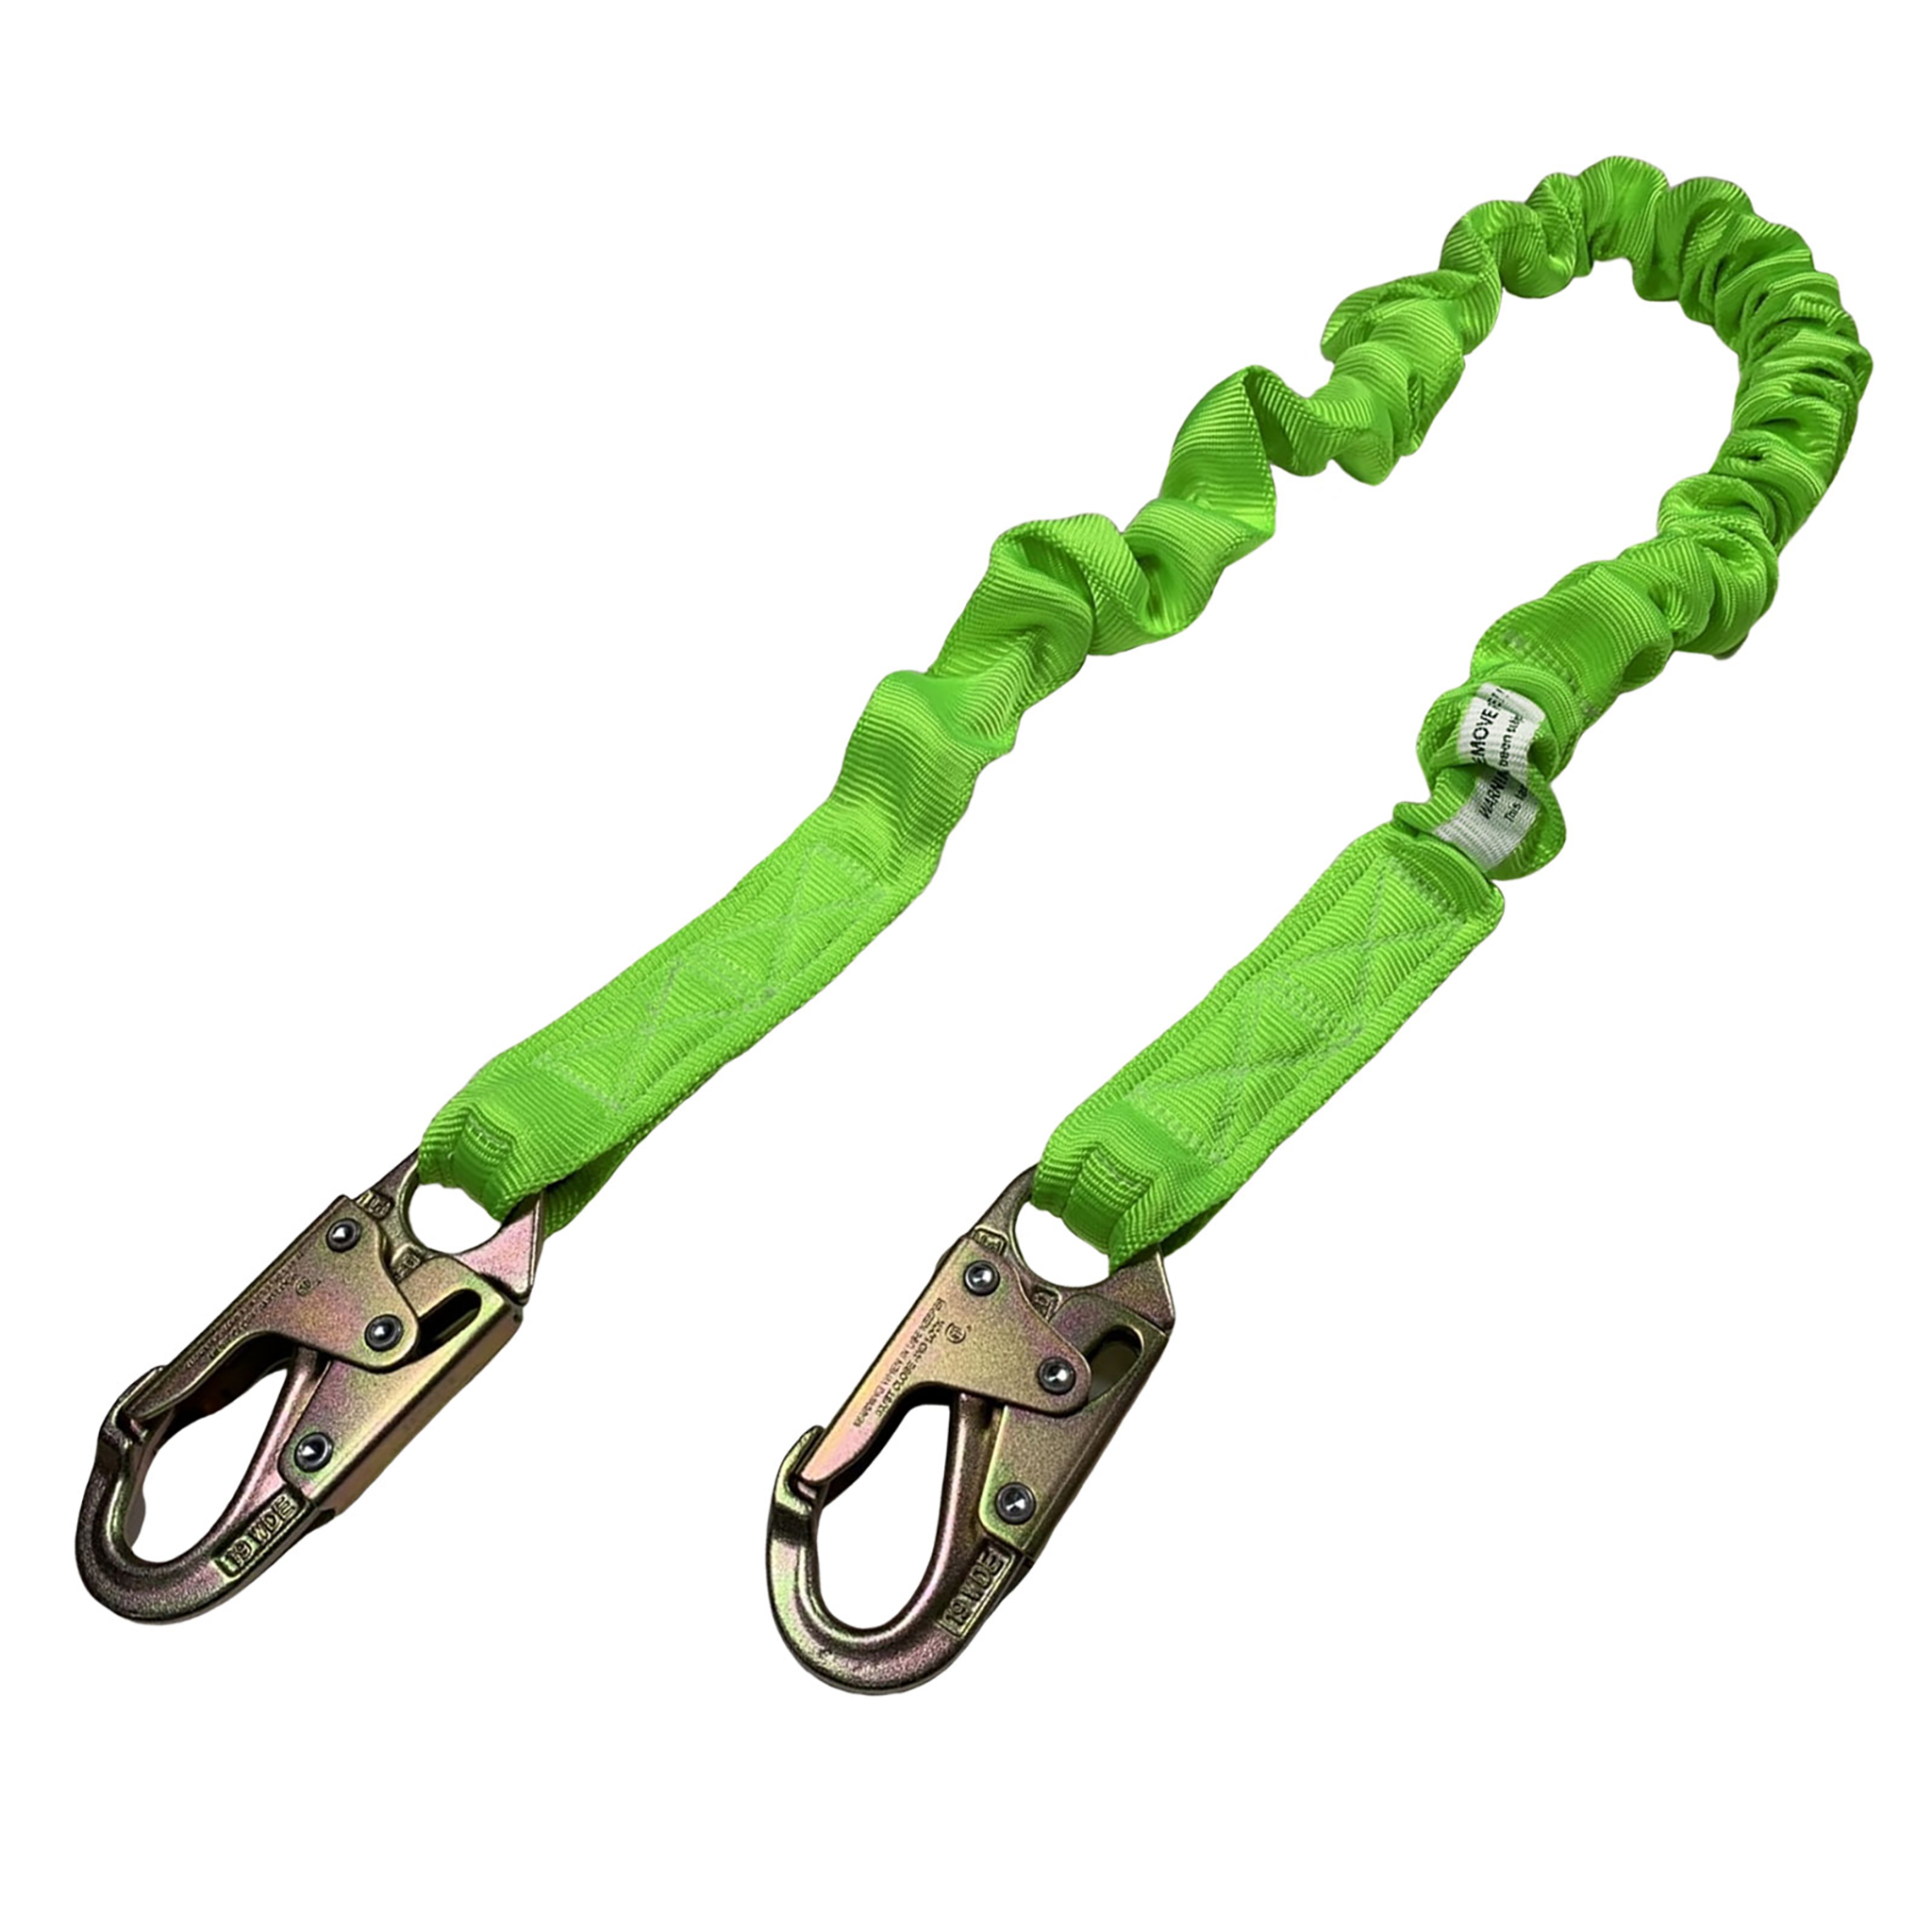 https://cdn.shopify.com/s/files/1/0517/5692/5094/products/SINGLE-LEG-INTERNAL-SHOCK-ABSORBING-LANYARD-WITH-SNAP-HOOKS-S-LY-02-JORESTECH-H.png?v=1631207123